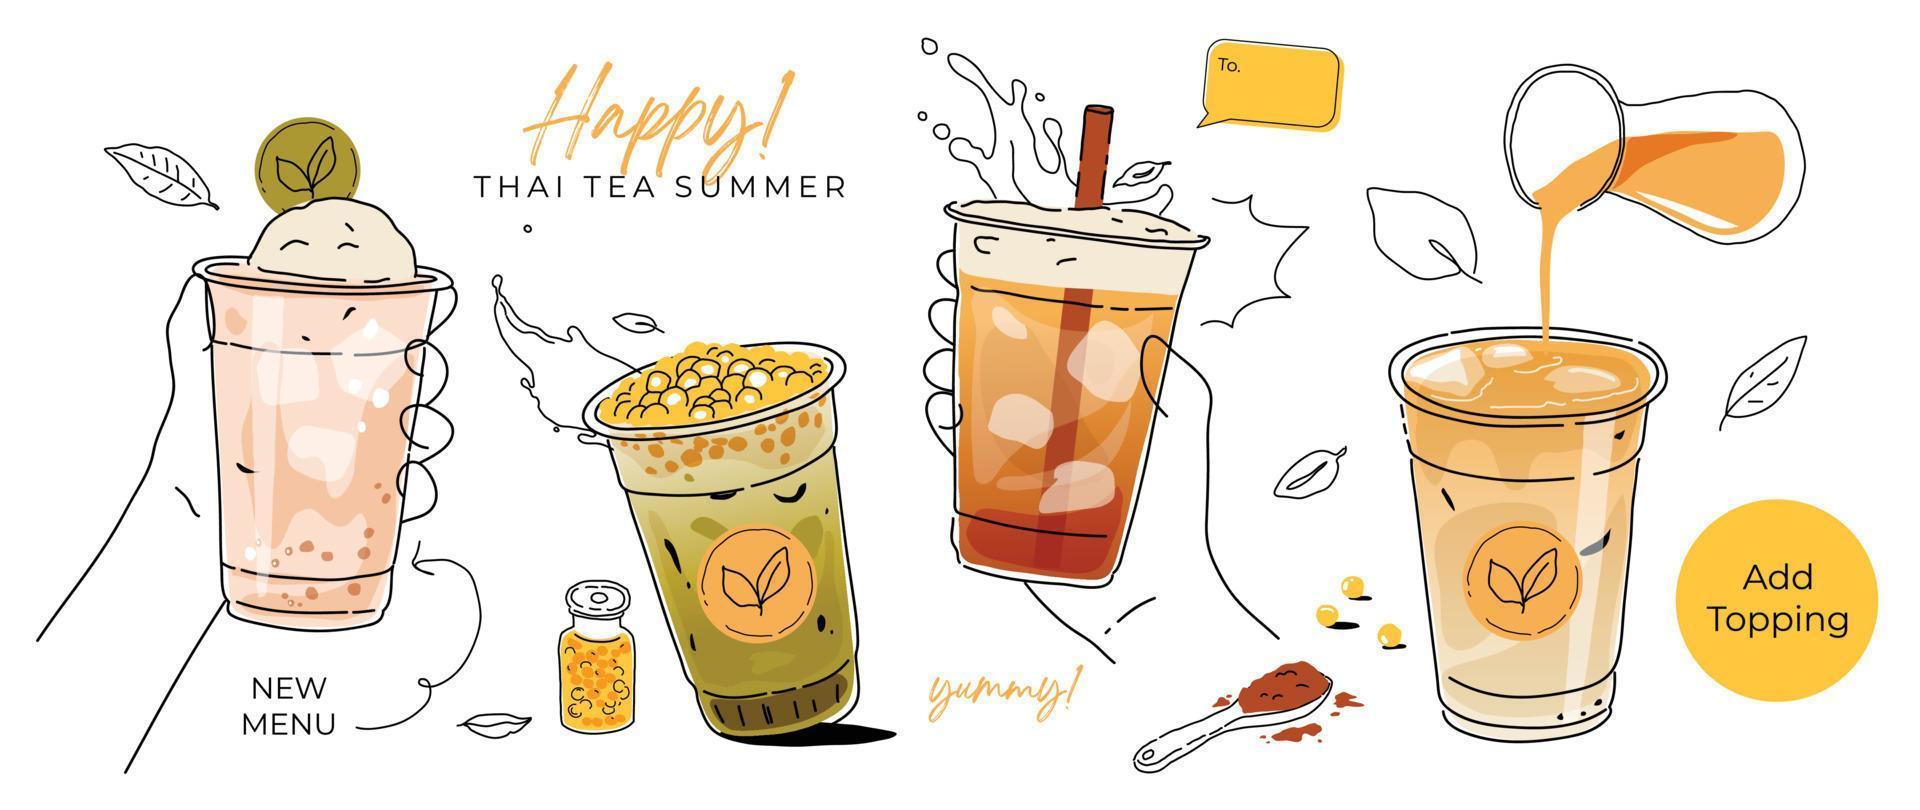 Ice tea summer drinks special promotions design. Thai tea, matcha green tea, fresh yummy drinks, bubble pearl milk tea, soft drinks with topping. Doodle style for advertisement, banner, poster. vector